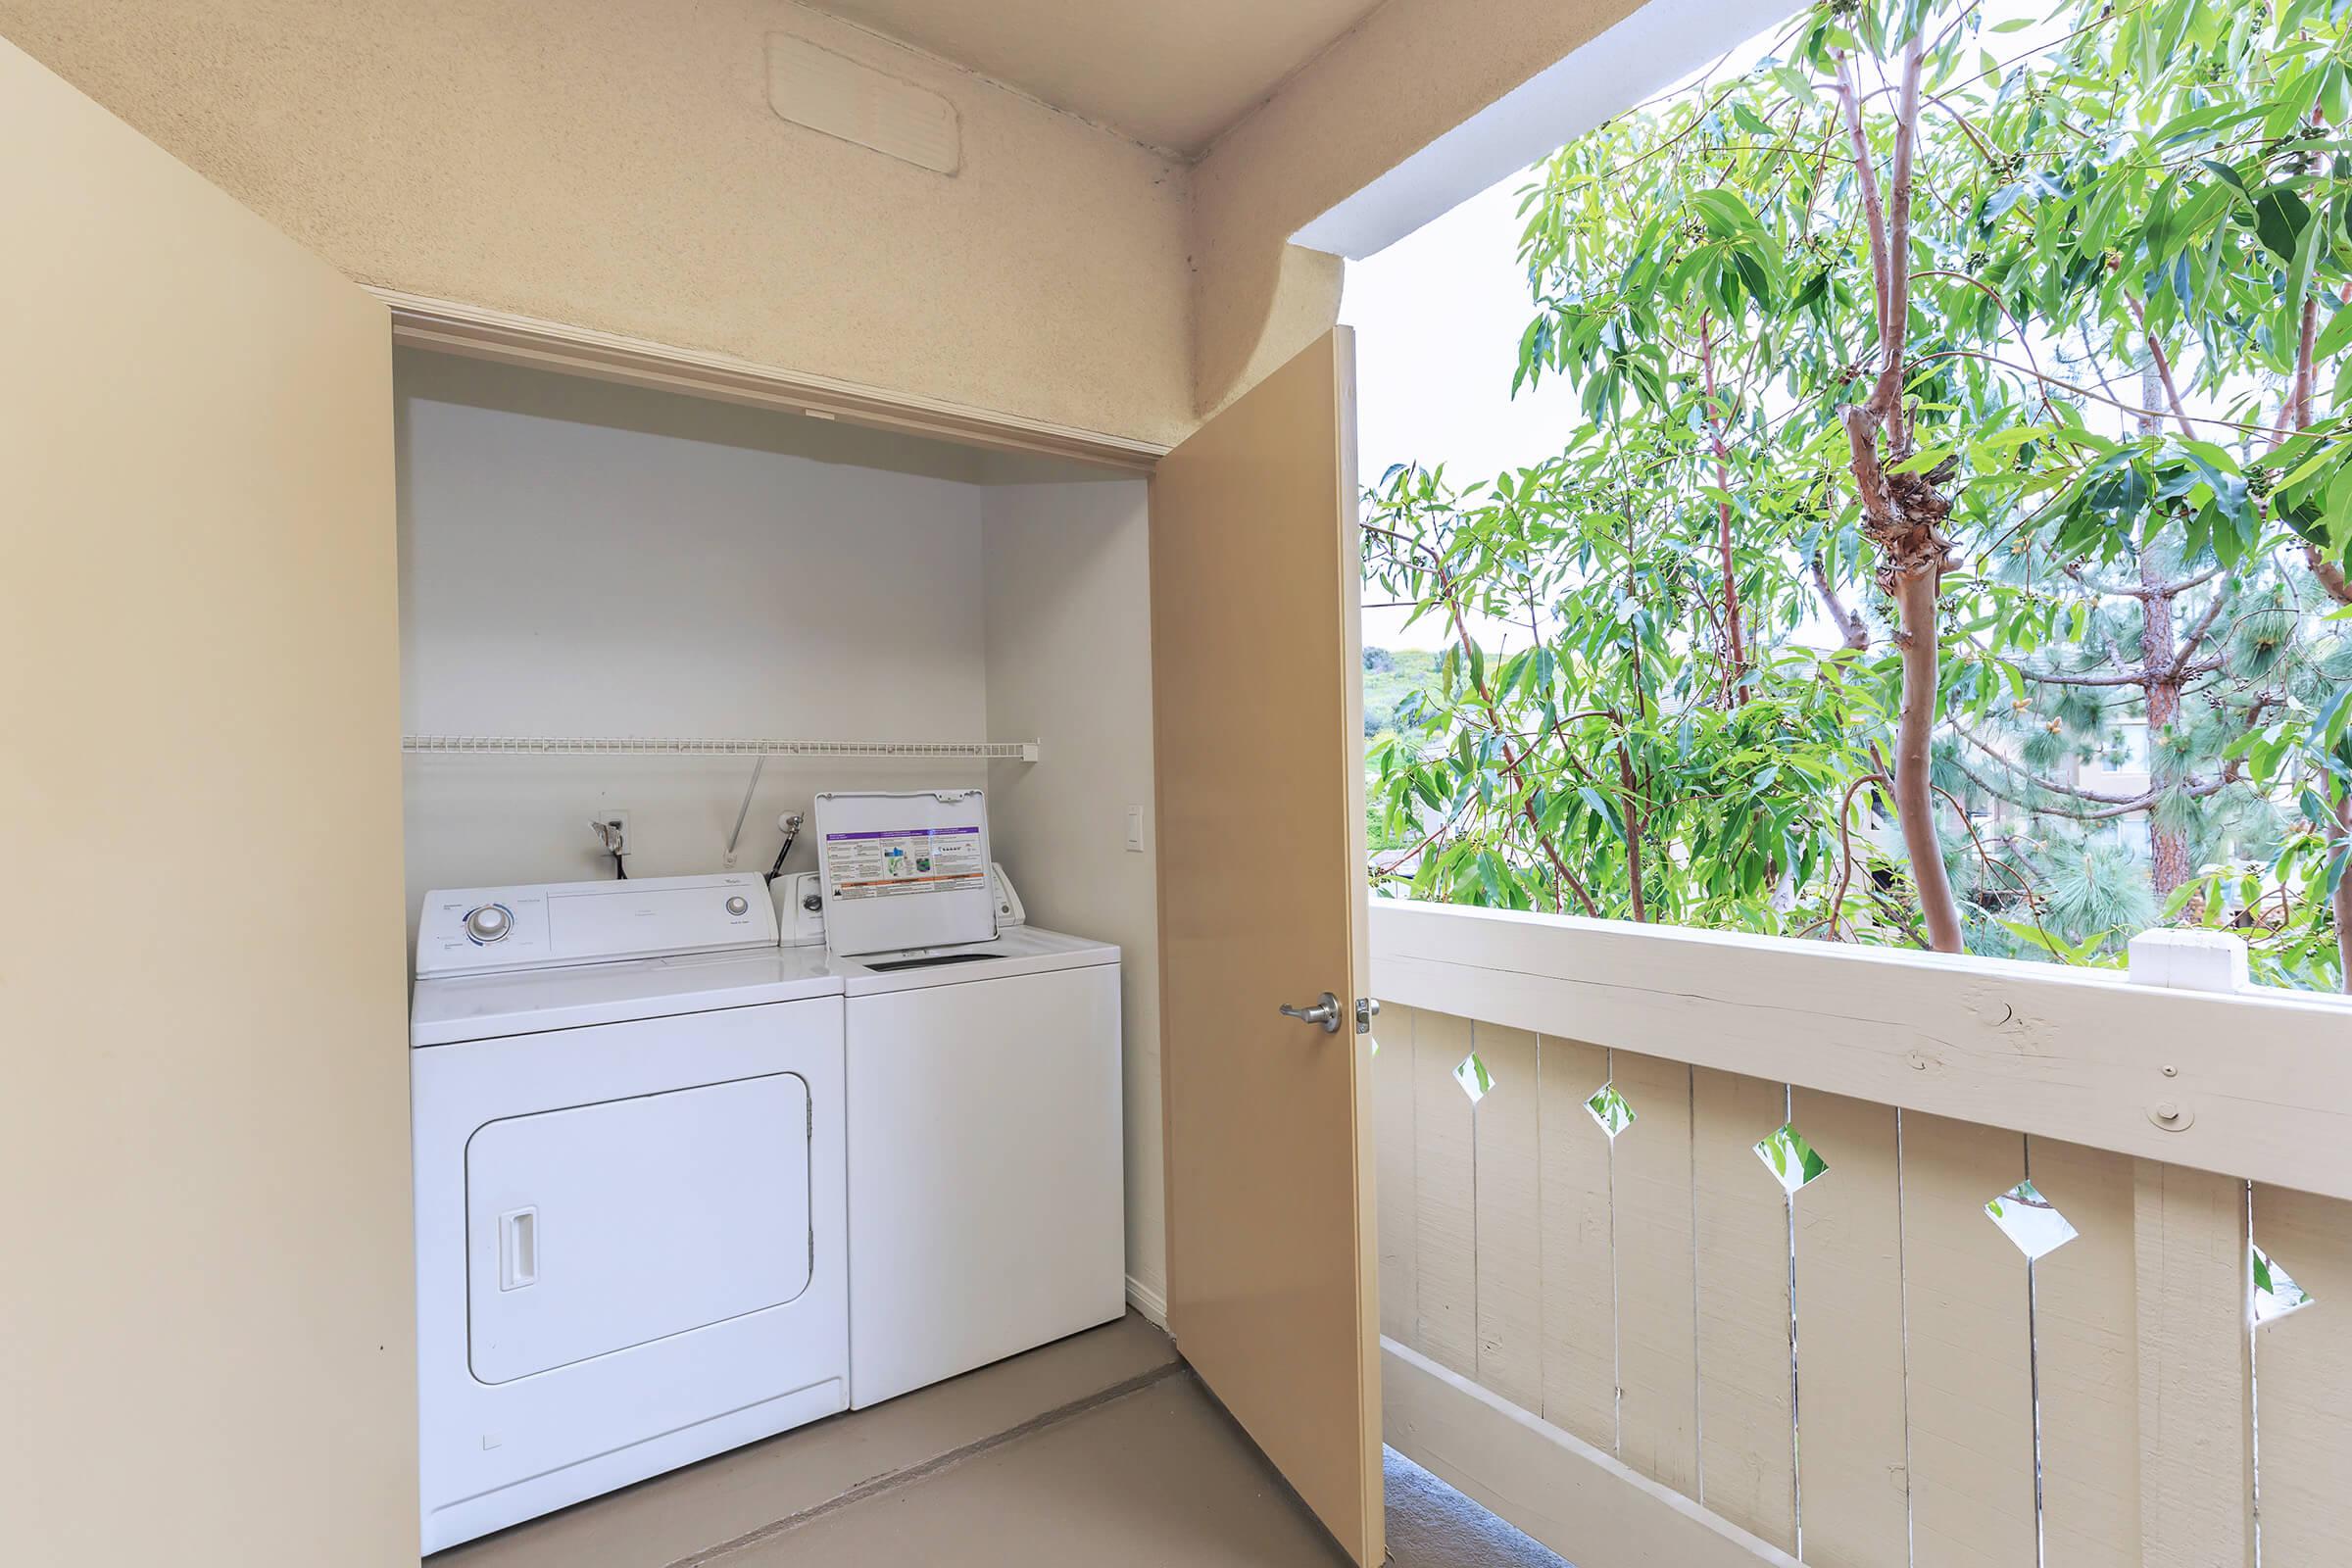 Washer and dryer in balcony closet